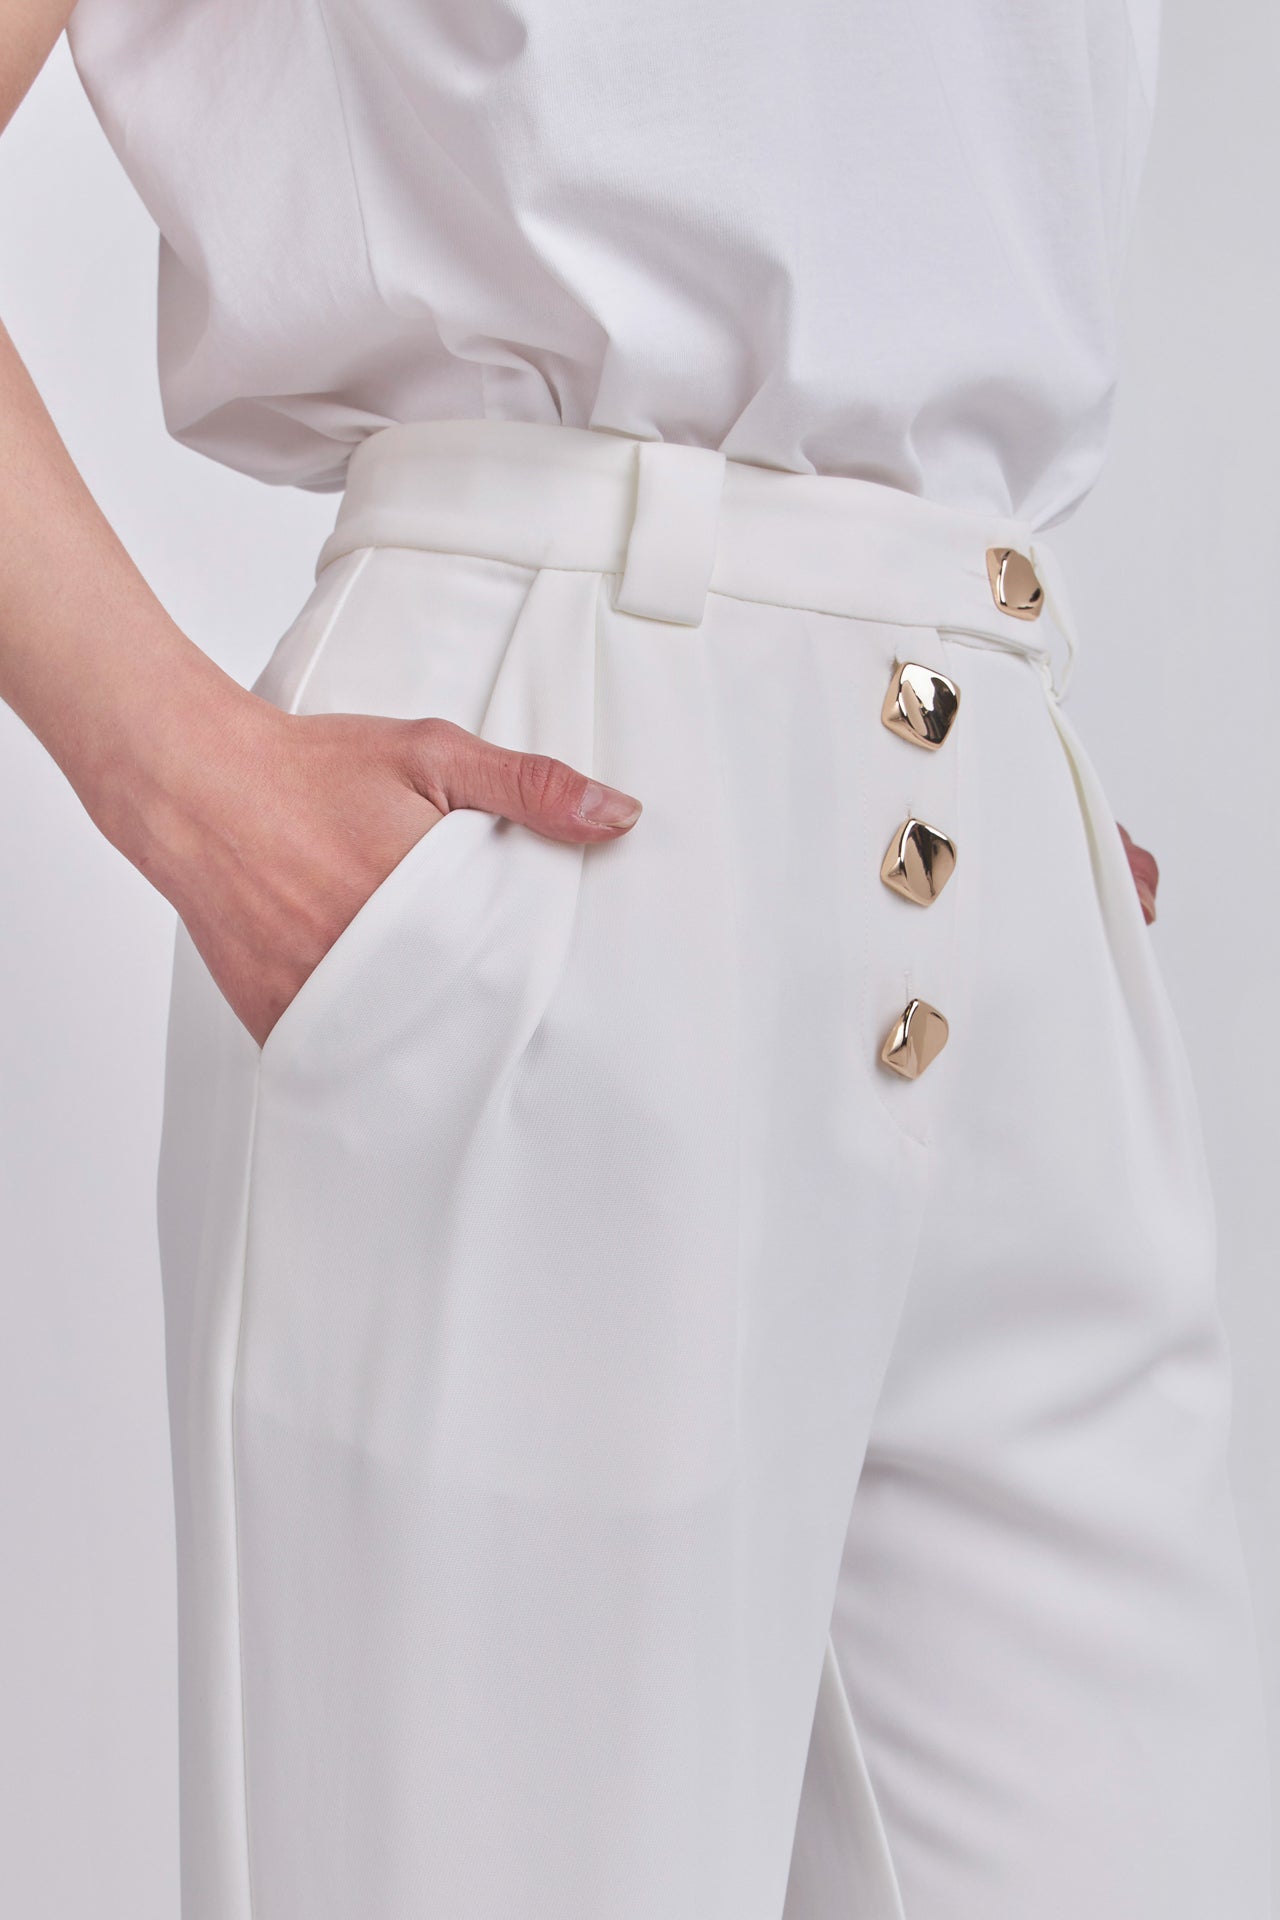 Trousers with Button Detail